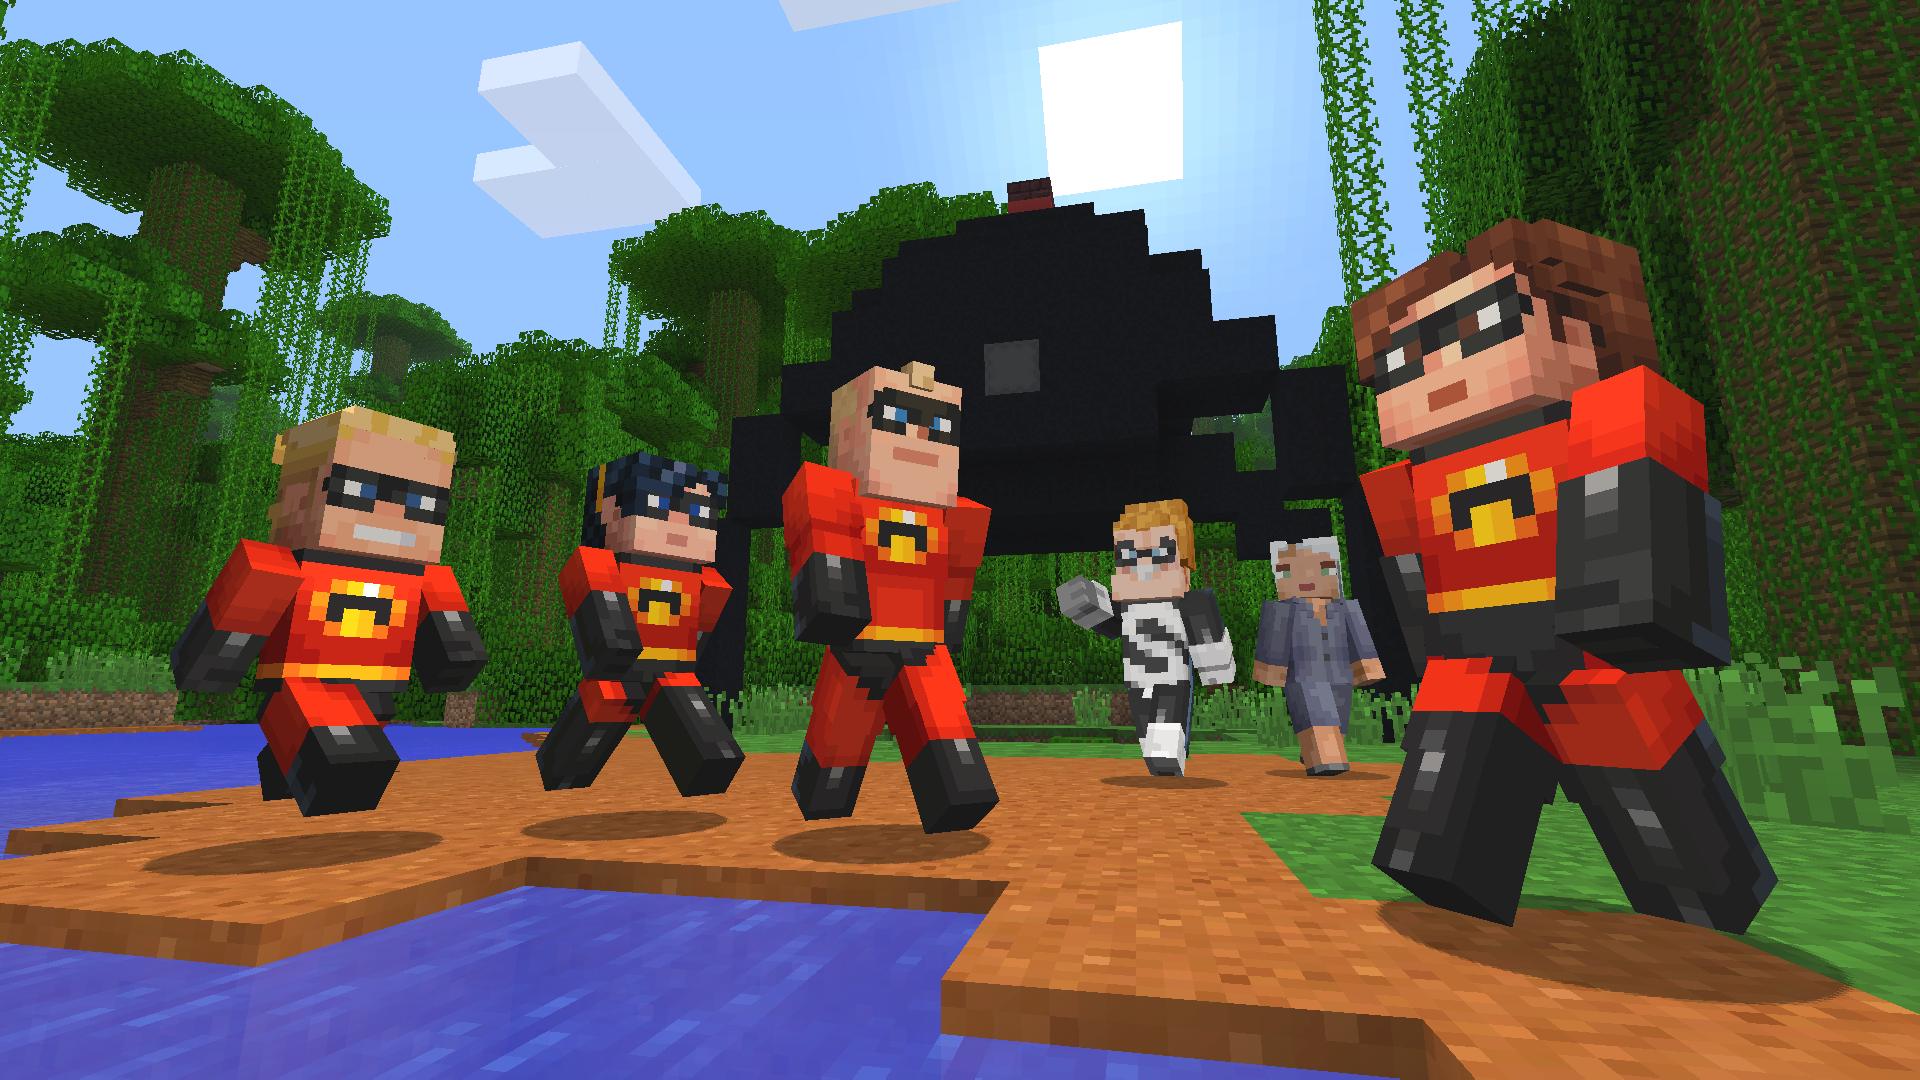 incredibles 2 minecraft poster